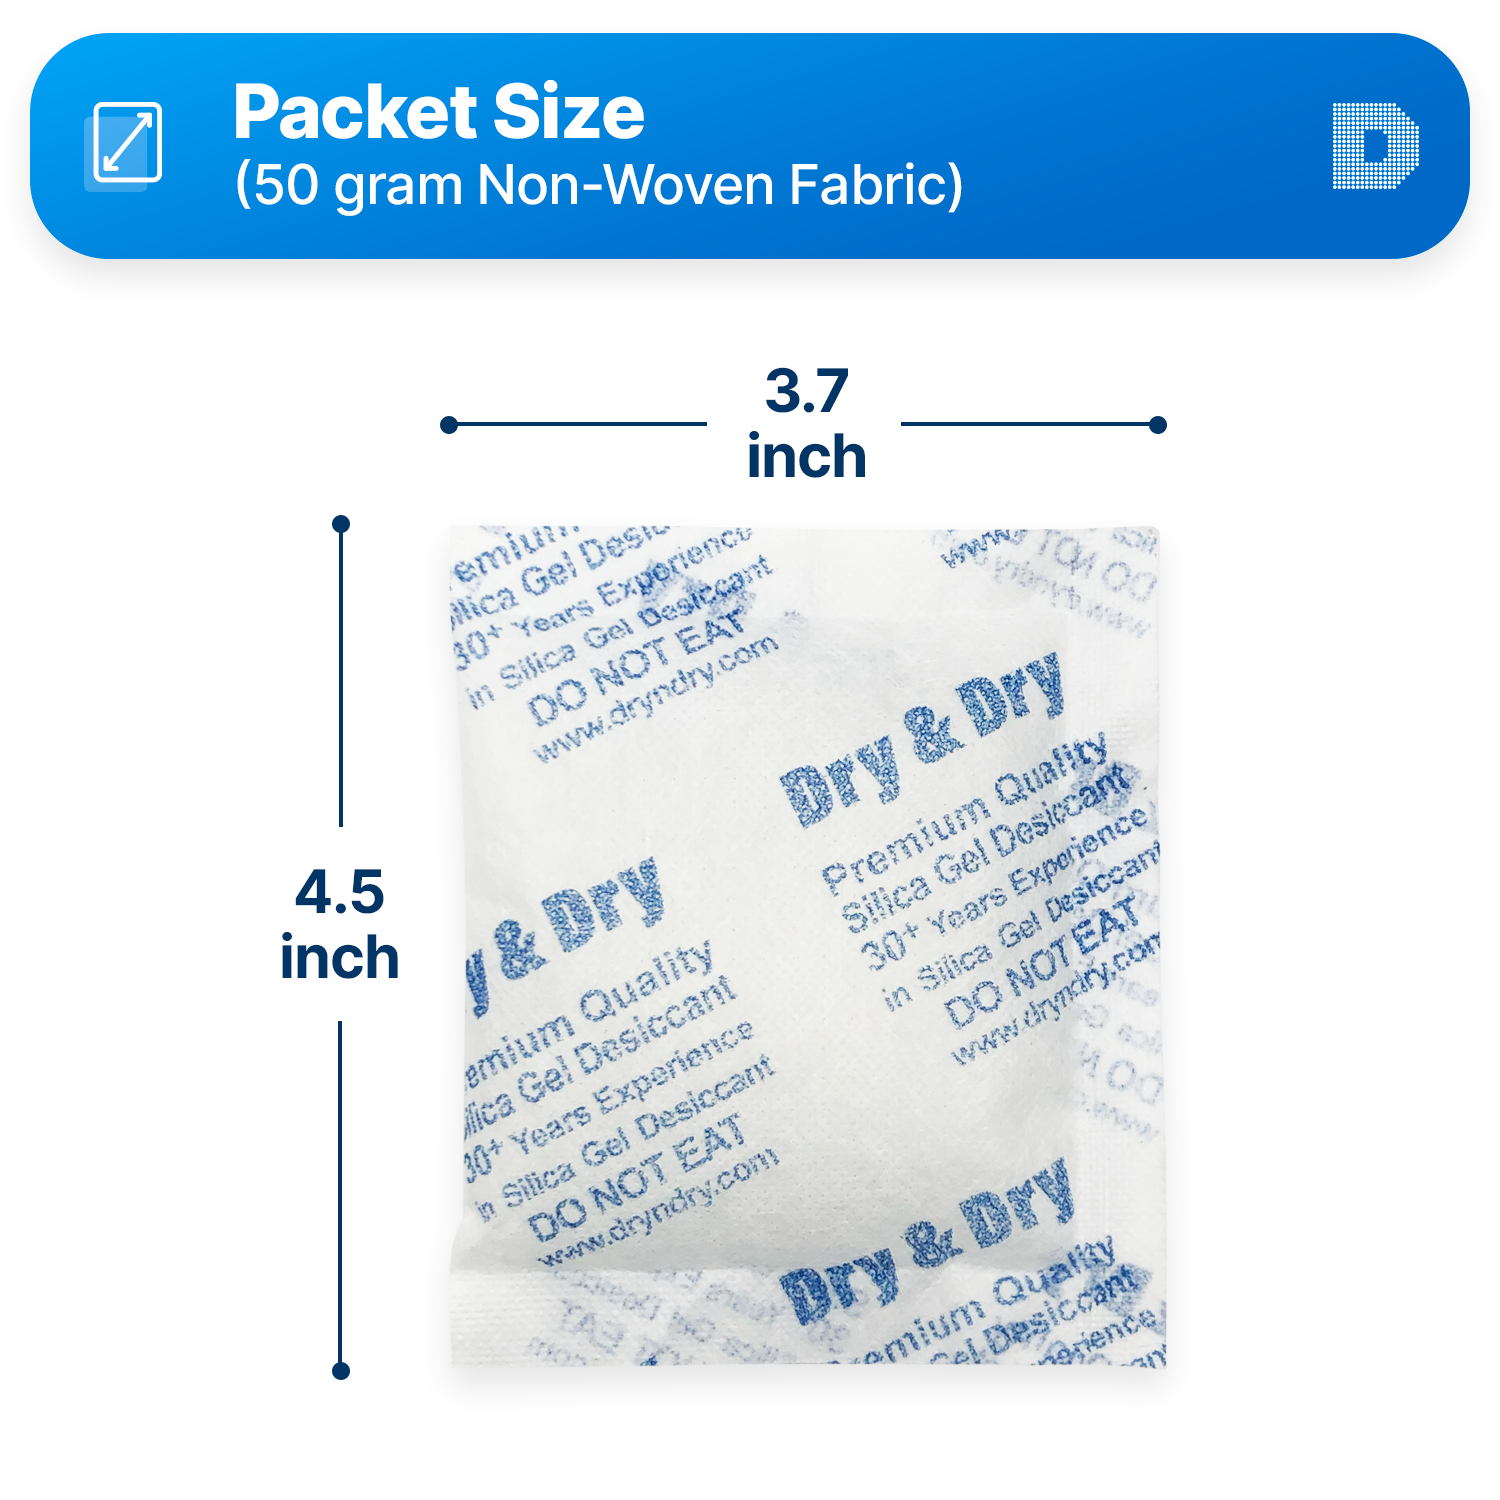 50 Gram [400 Packets]  "Dry & Dry" Premium Silica Gel Desiccant Packets - Rechargeable Non-Woven Fabric (Cloth)